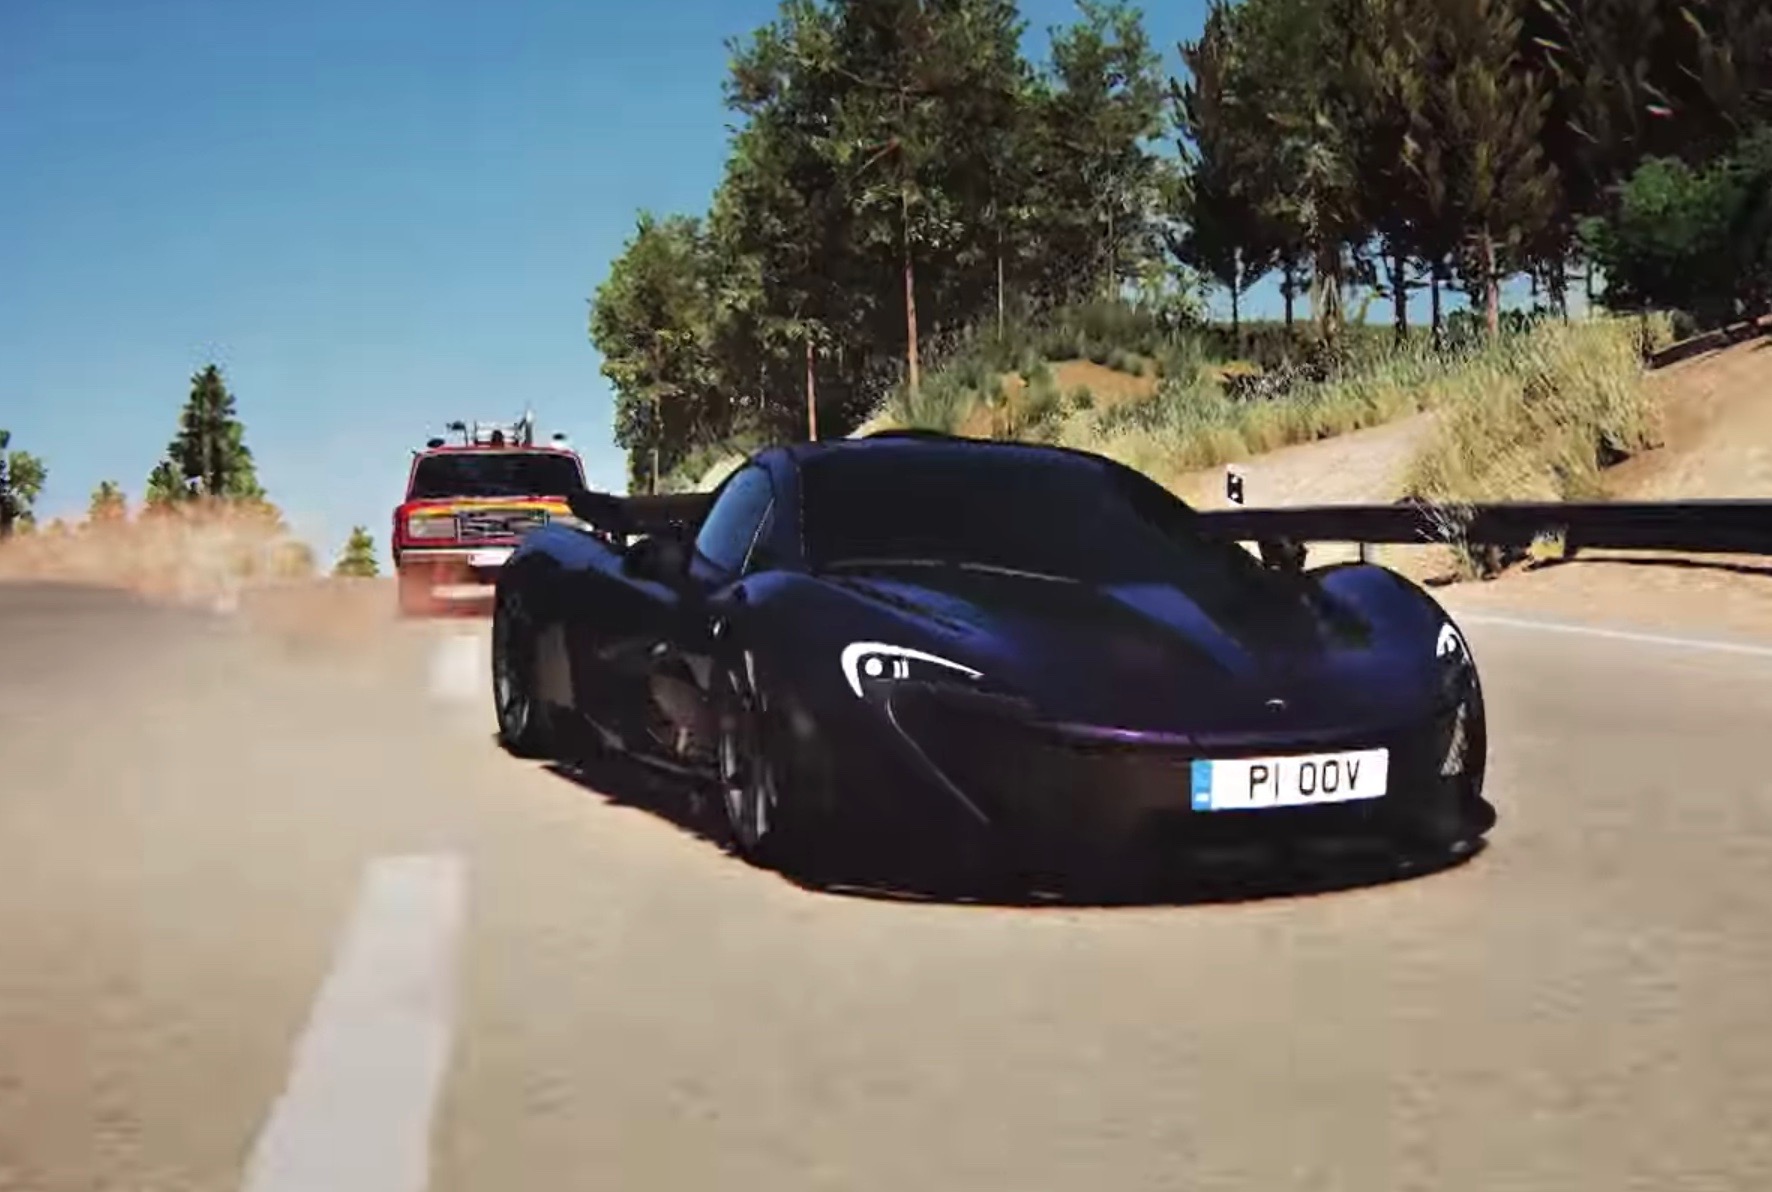 The Grand Tour Game video game is coming soon, trailer released (video)